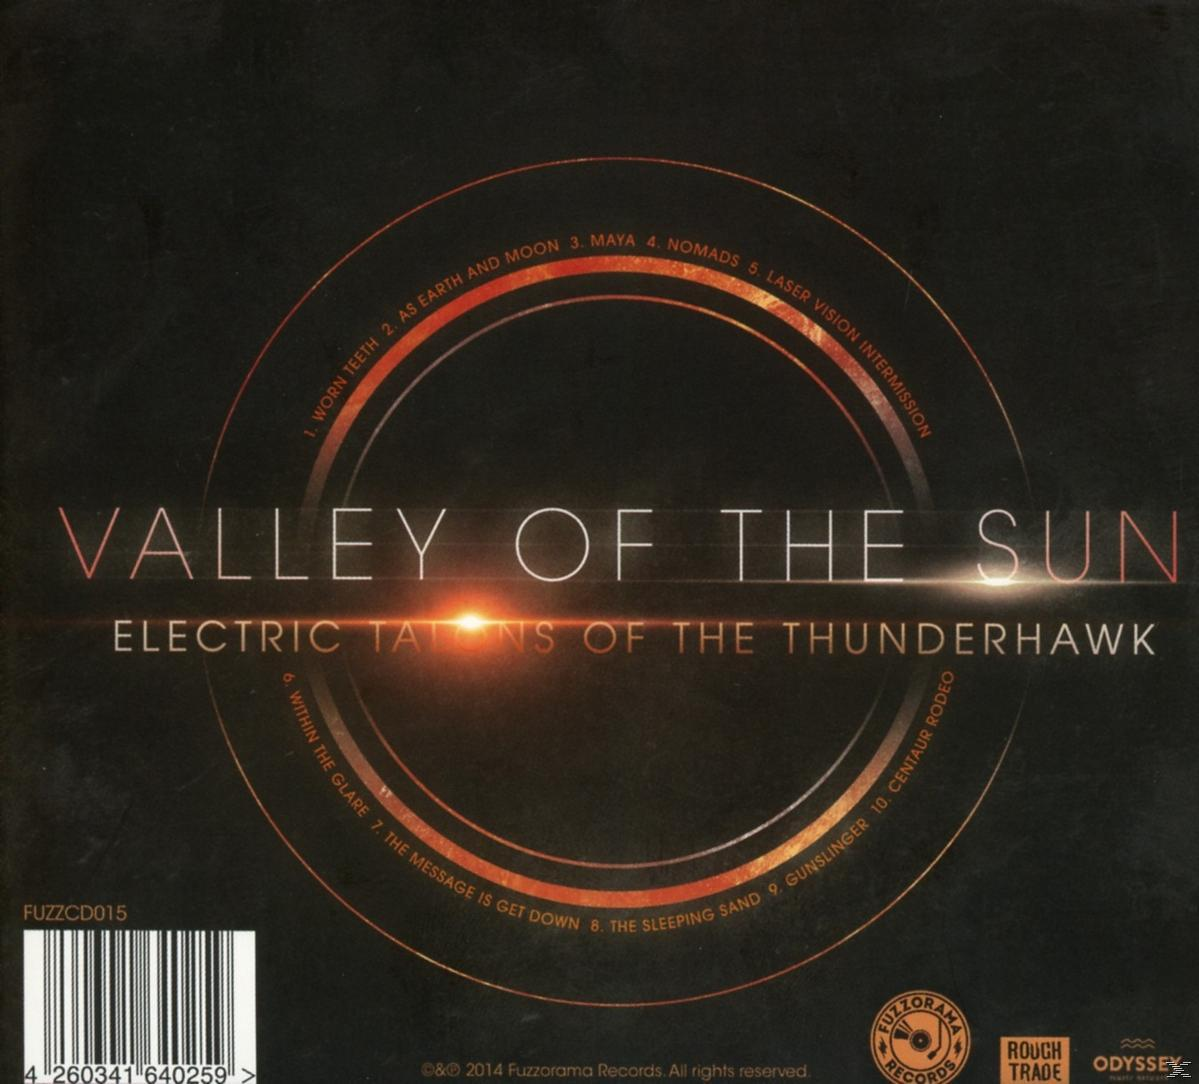 The The Of - Electric - Valley Talons Thunderhawk Of (CD) Sun